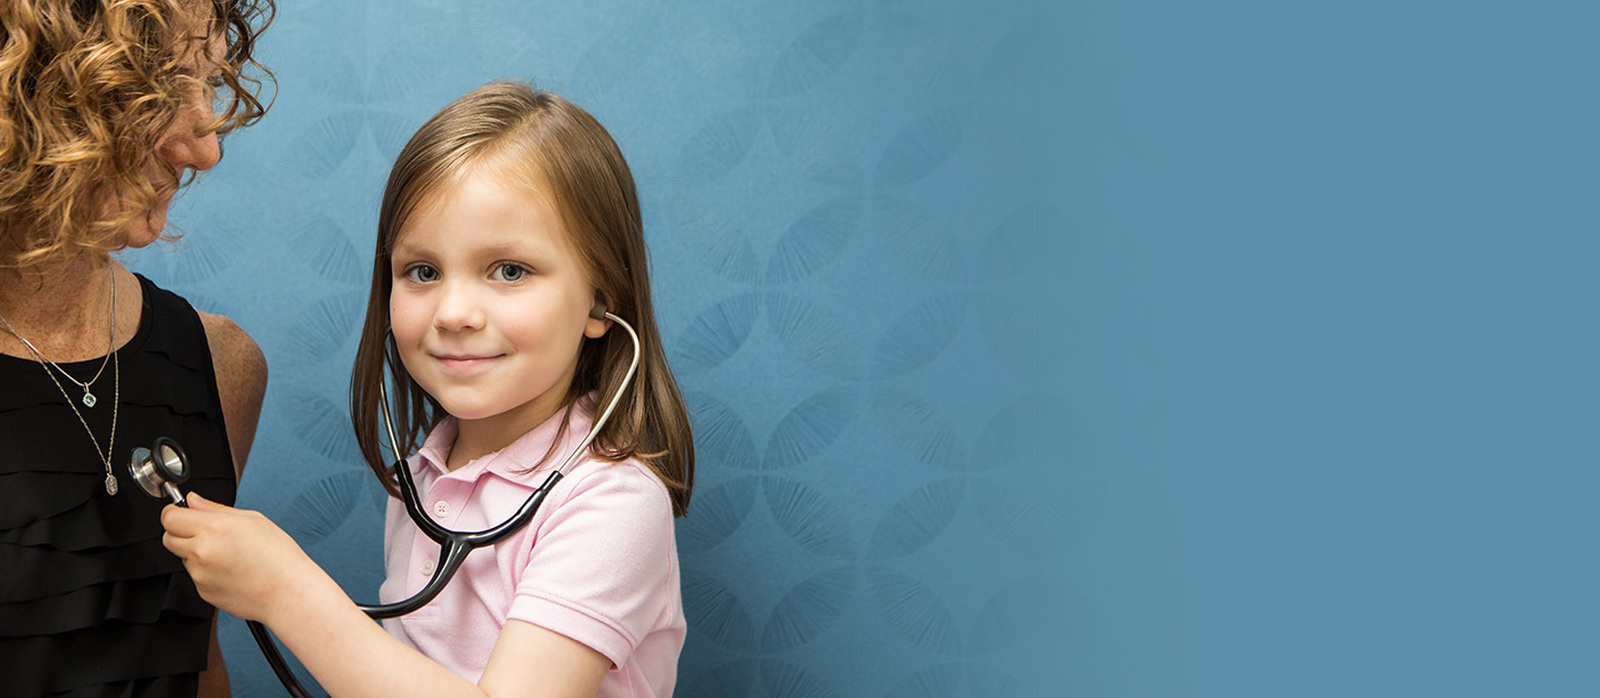 Routine Well Child Visits and Immunizations